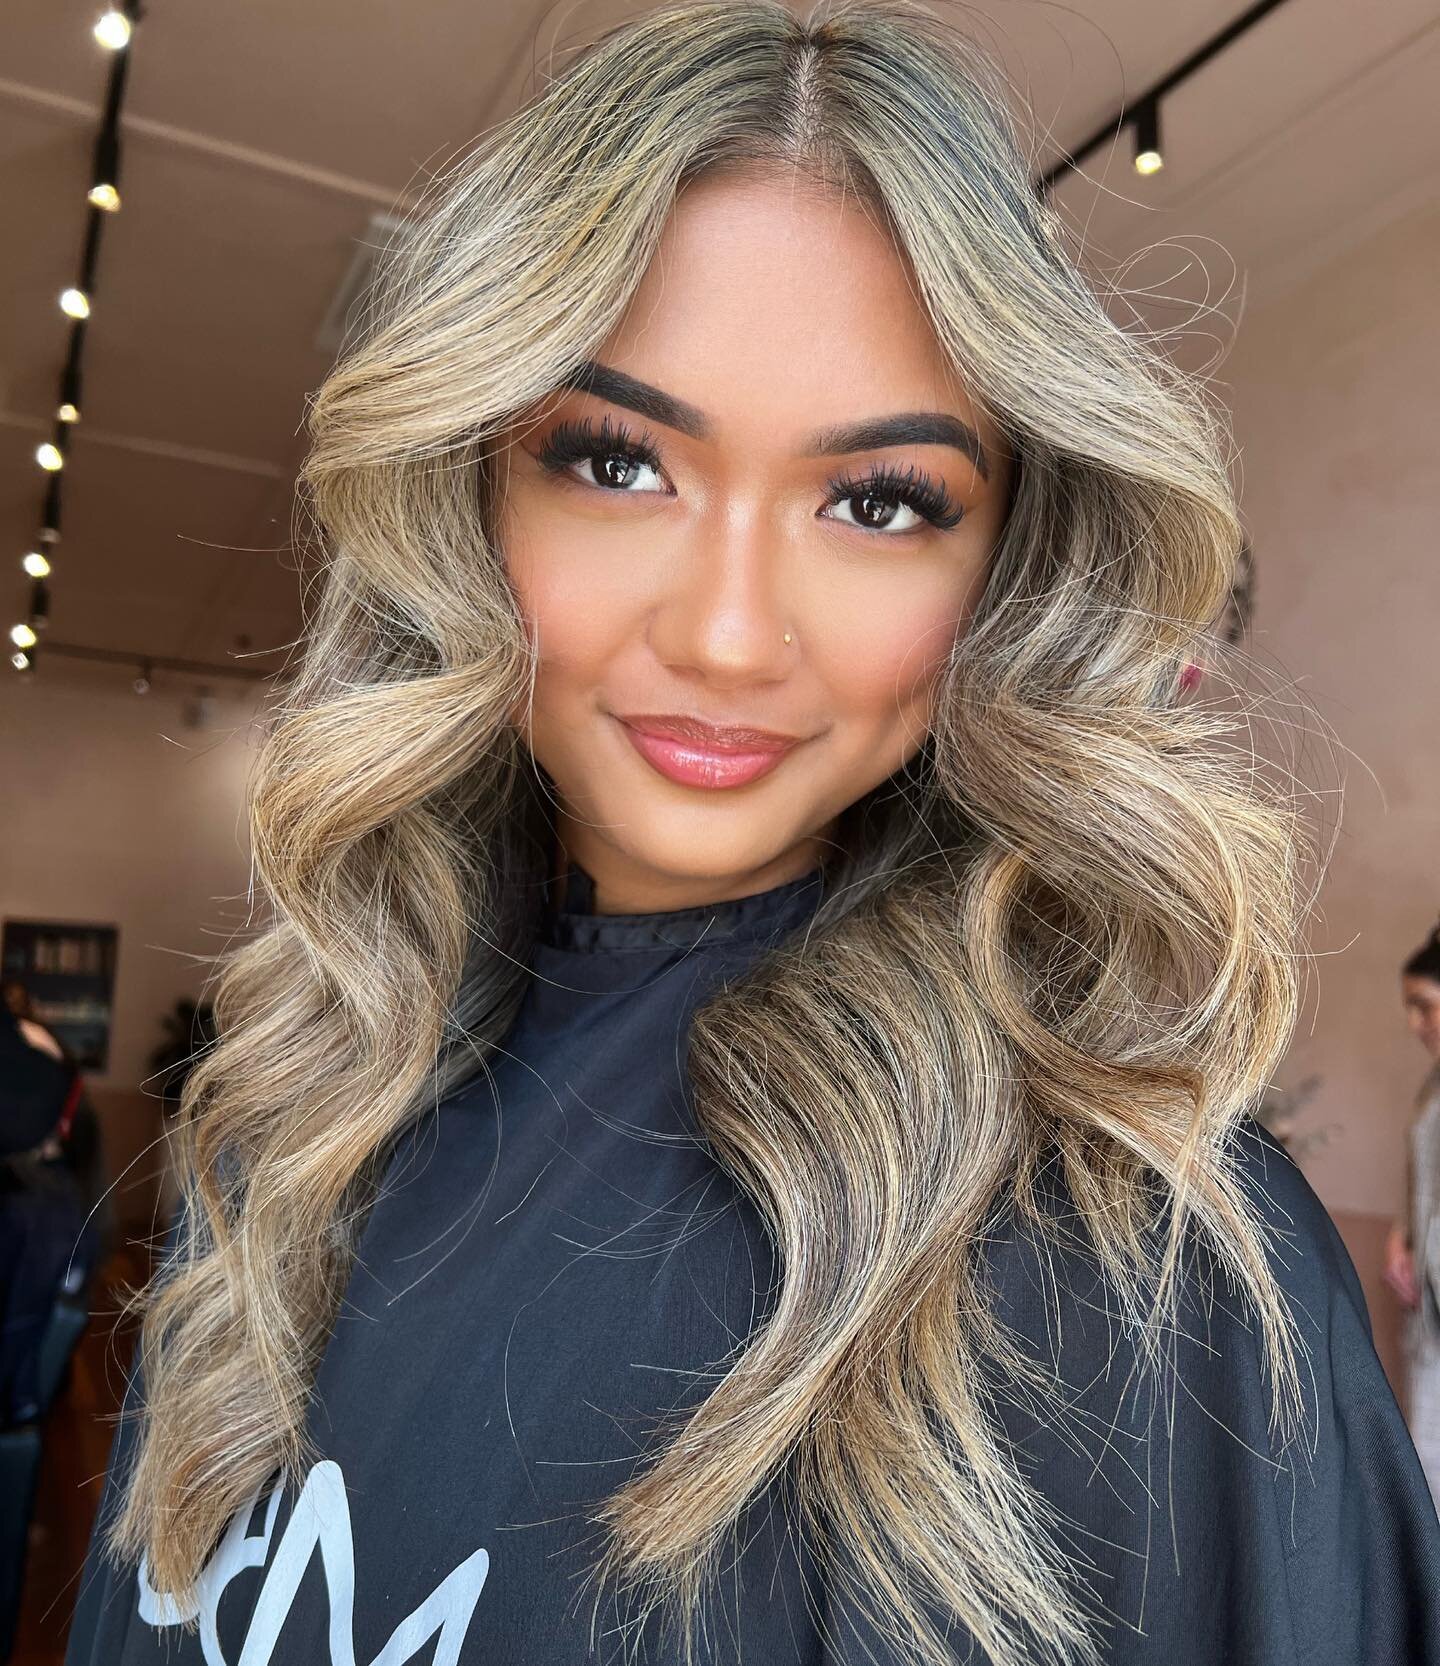 HAPPIEST 18TH BIRTHDAY TO OUR ANGEL FACE @juliecasingal 🎉🎉
We hope you have the best weekend with you&rsquo;re family &amp; friends 🤍
Colour by Monique
Cut by @damien_infinityhair 
MUA @shannonhope_makeupartist